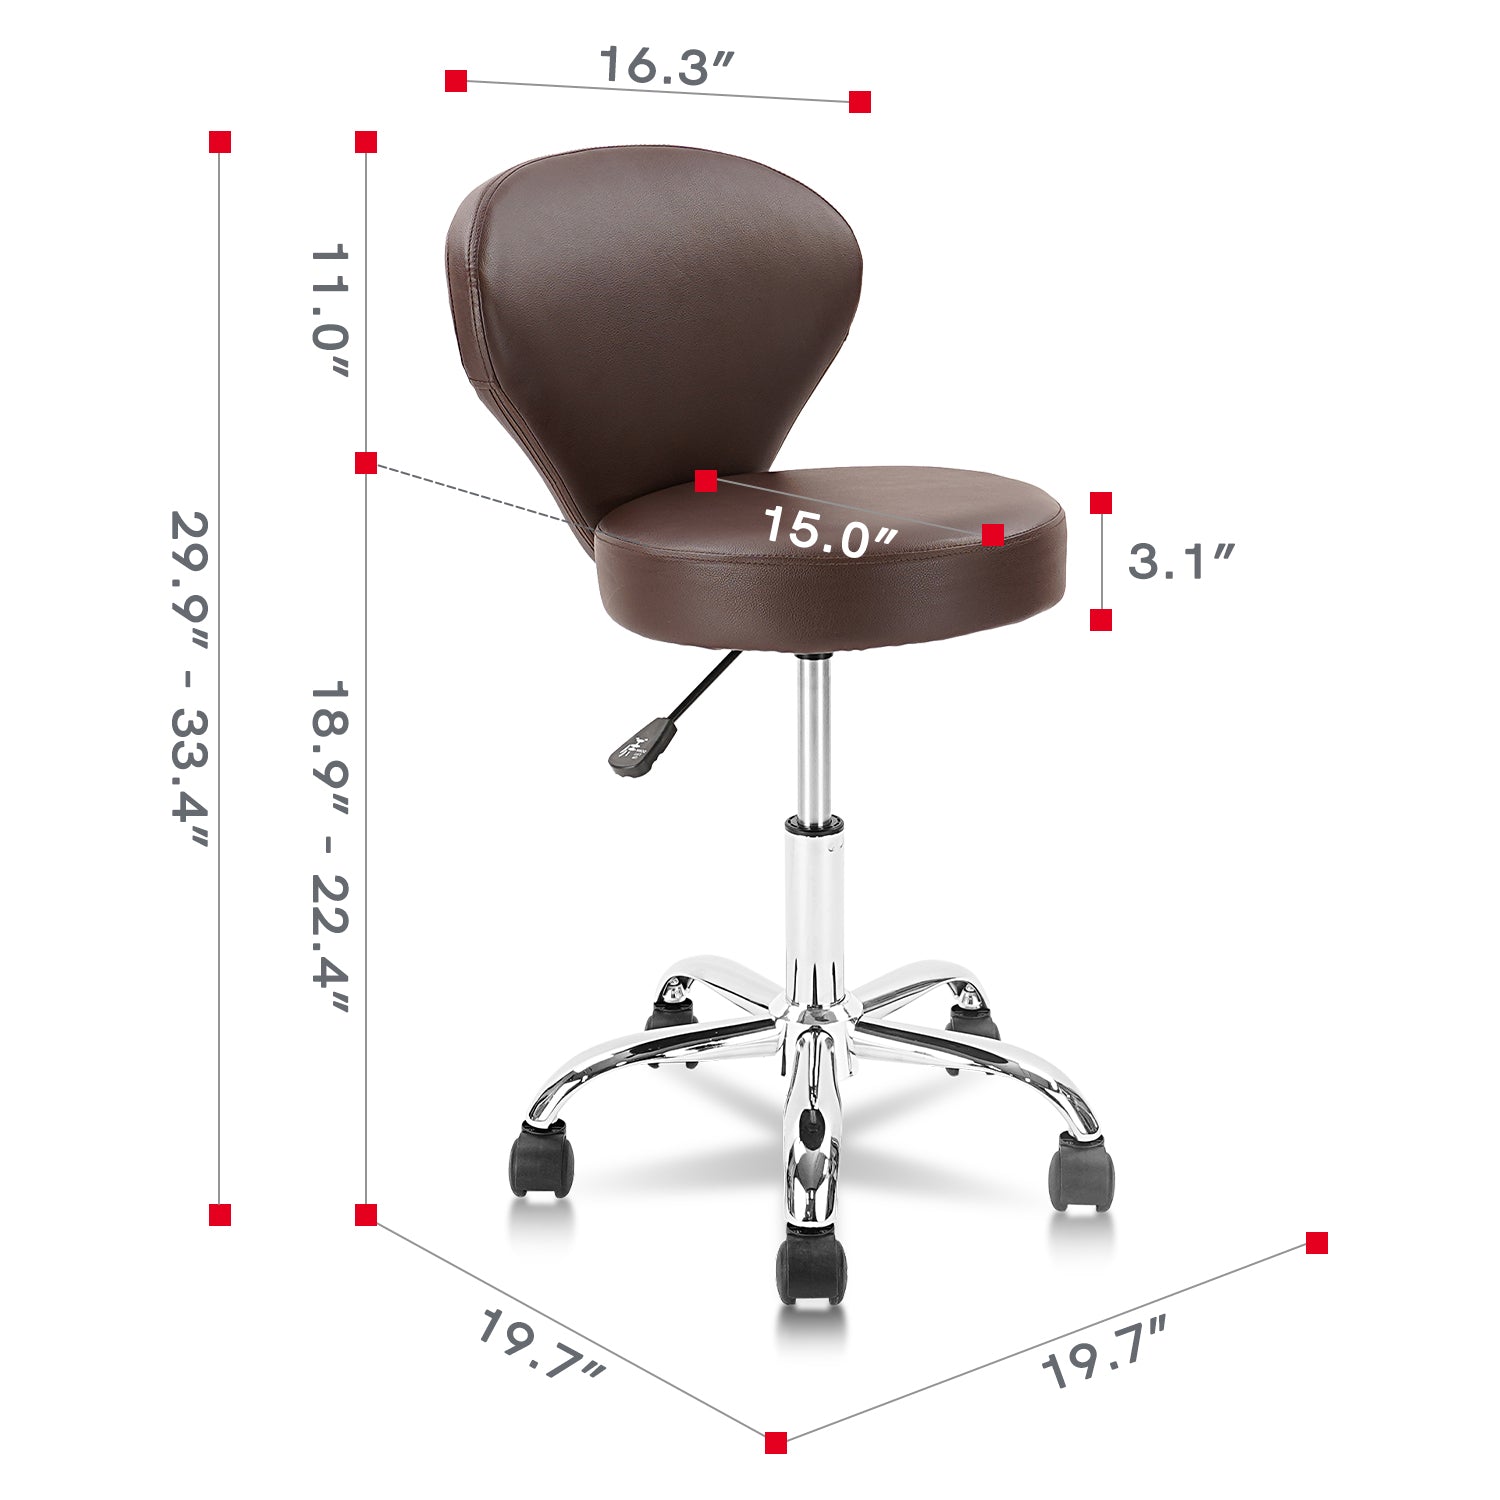 KLASIKA Drafting Chair Rolling Swivel Salon Stool with Back Support Foot Rest Adjustable Hydraulic for Office Massage Facial Spa Medical Tattoo Beauty Barber